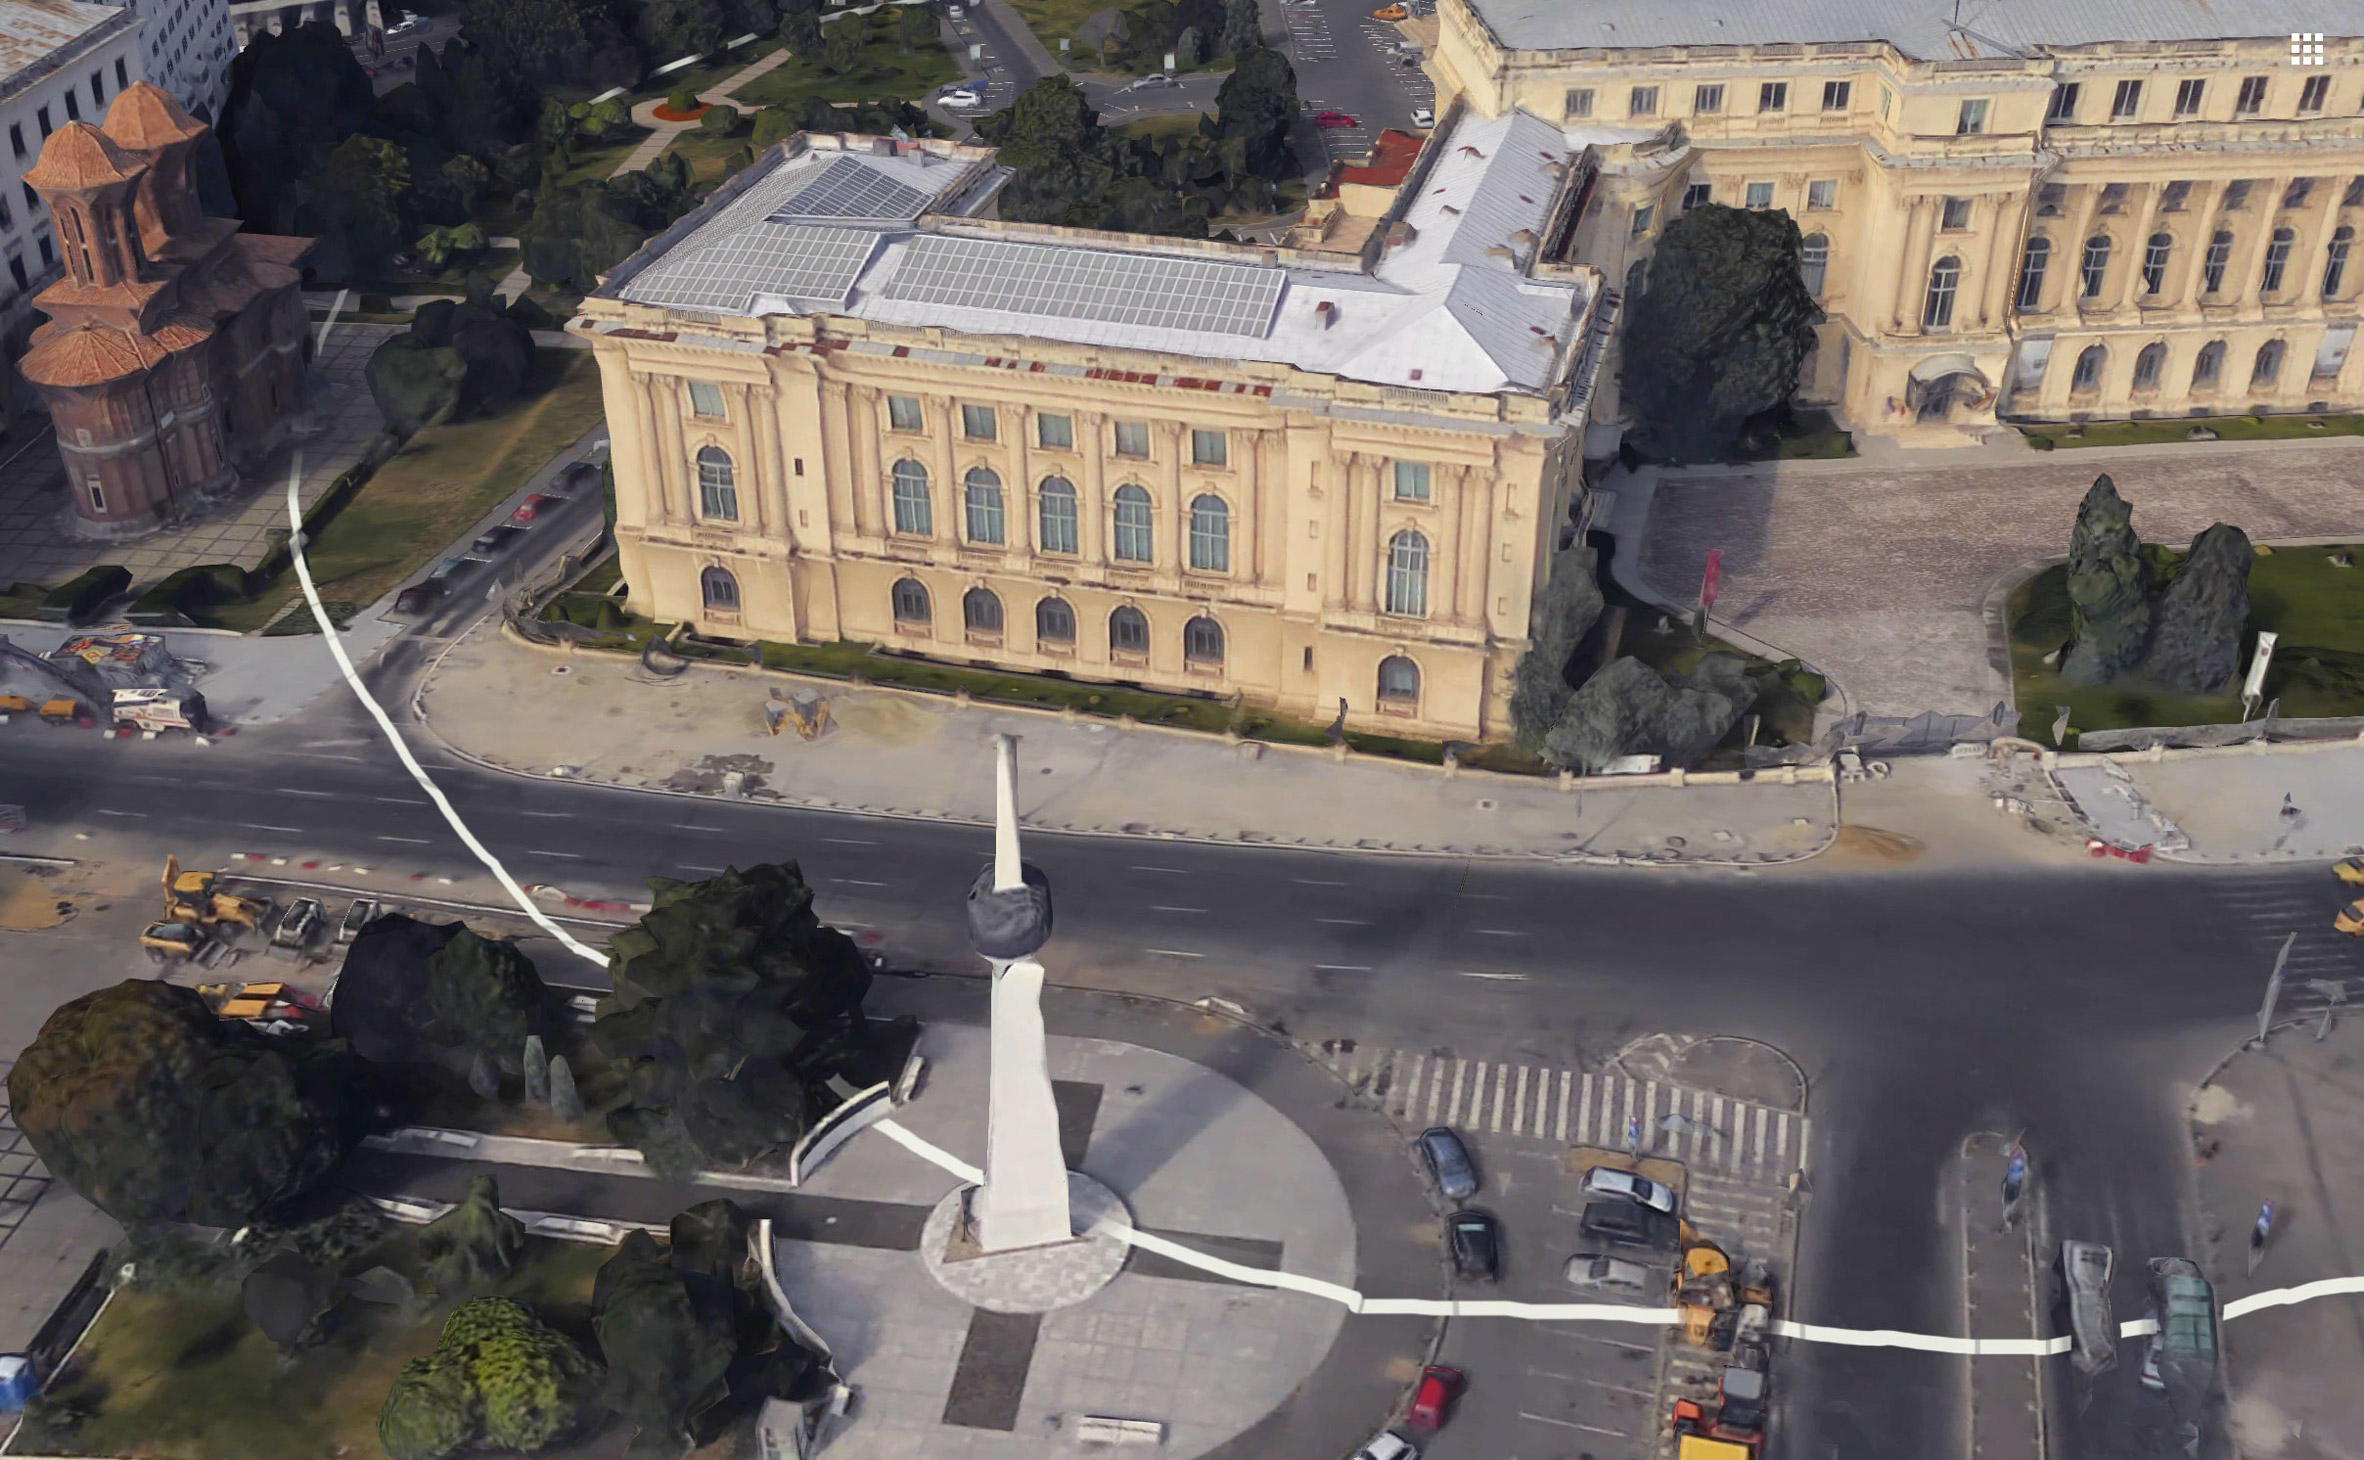 Artist paints impermanent white circle around the Romanian National Museum of Art